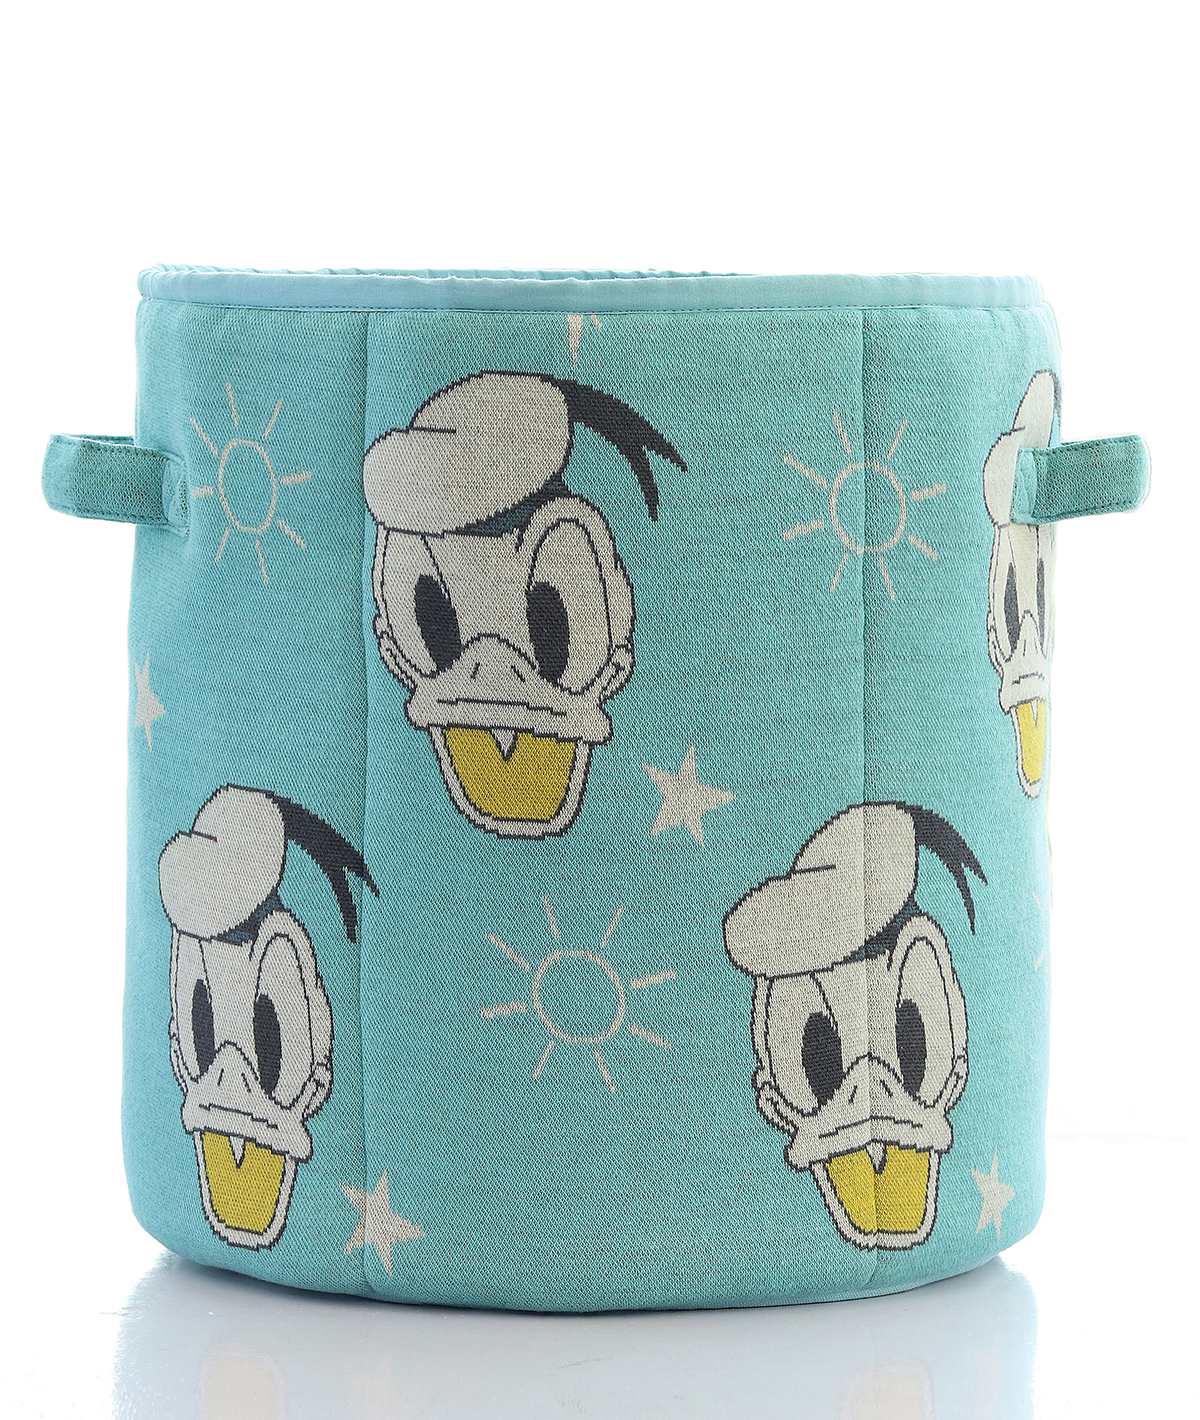 Donald Duck Cotton Knitted Large Kids Baskets For Assembling Toys and other Playing Accessories